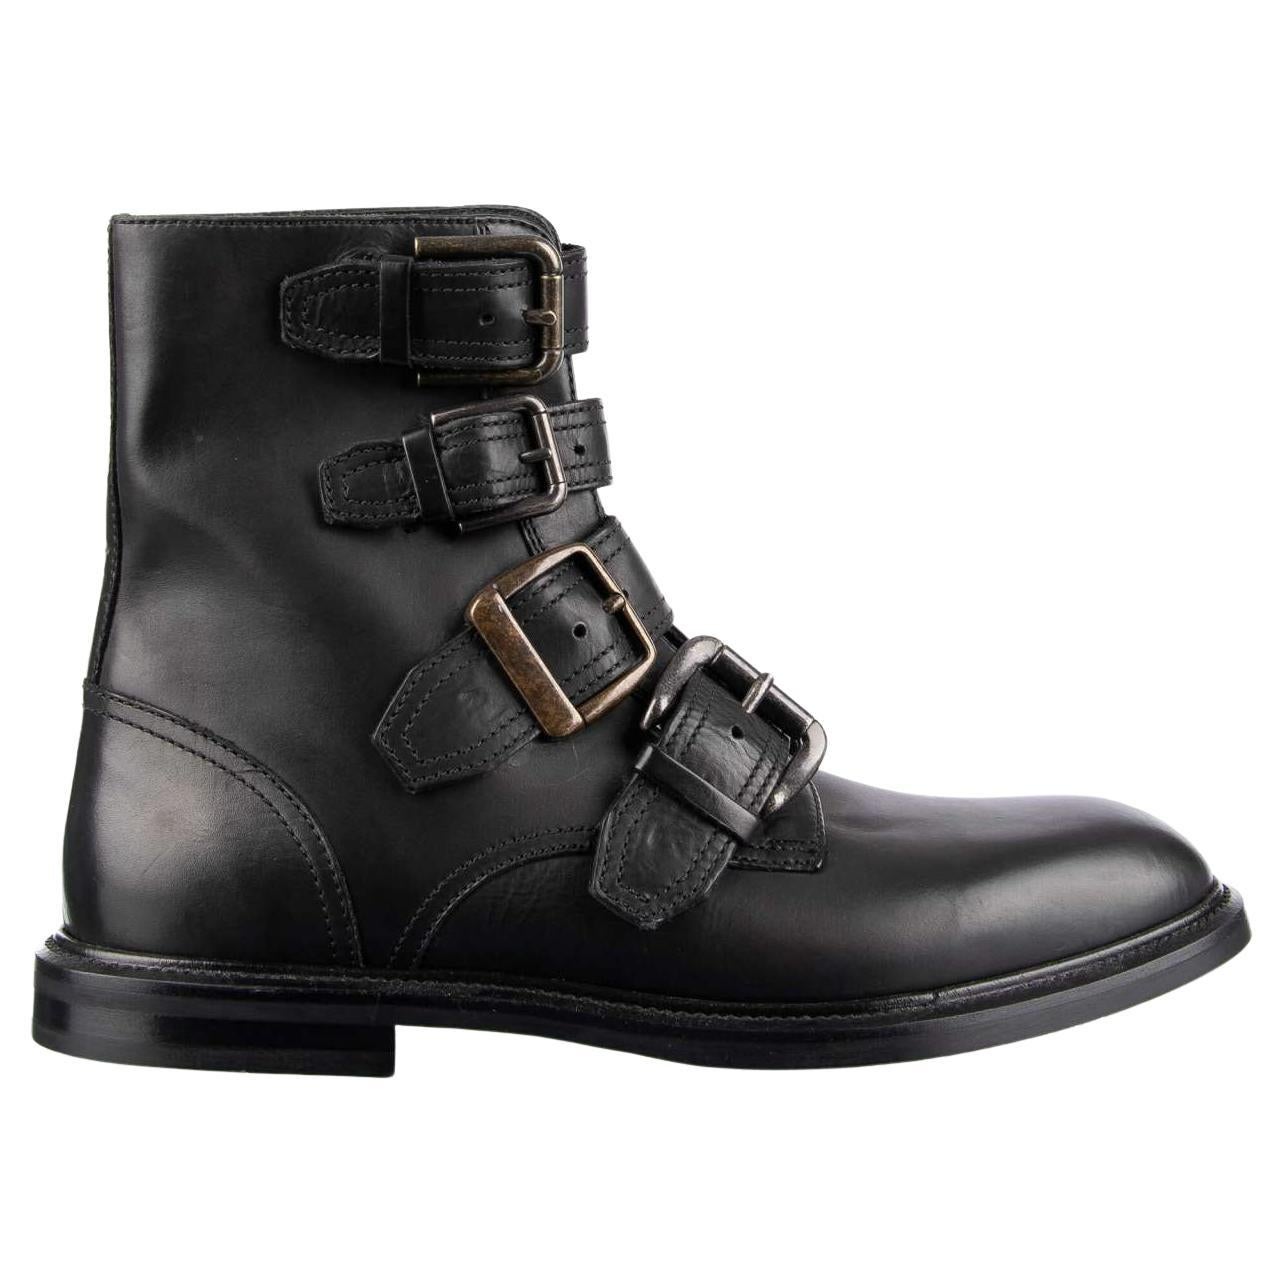 Dolce & Gabbana - Ankle Boots with Buckles MARSALA Black EUR 42 For Sale